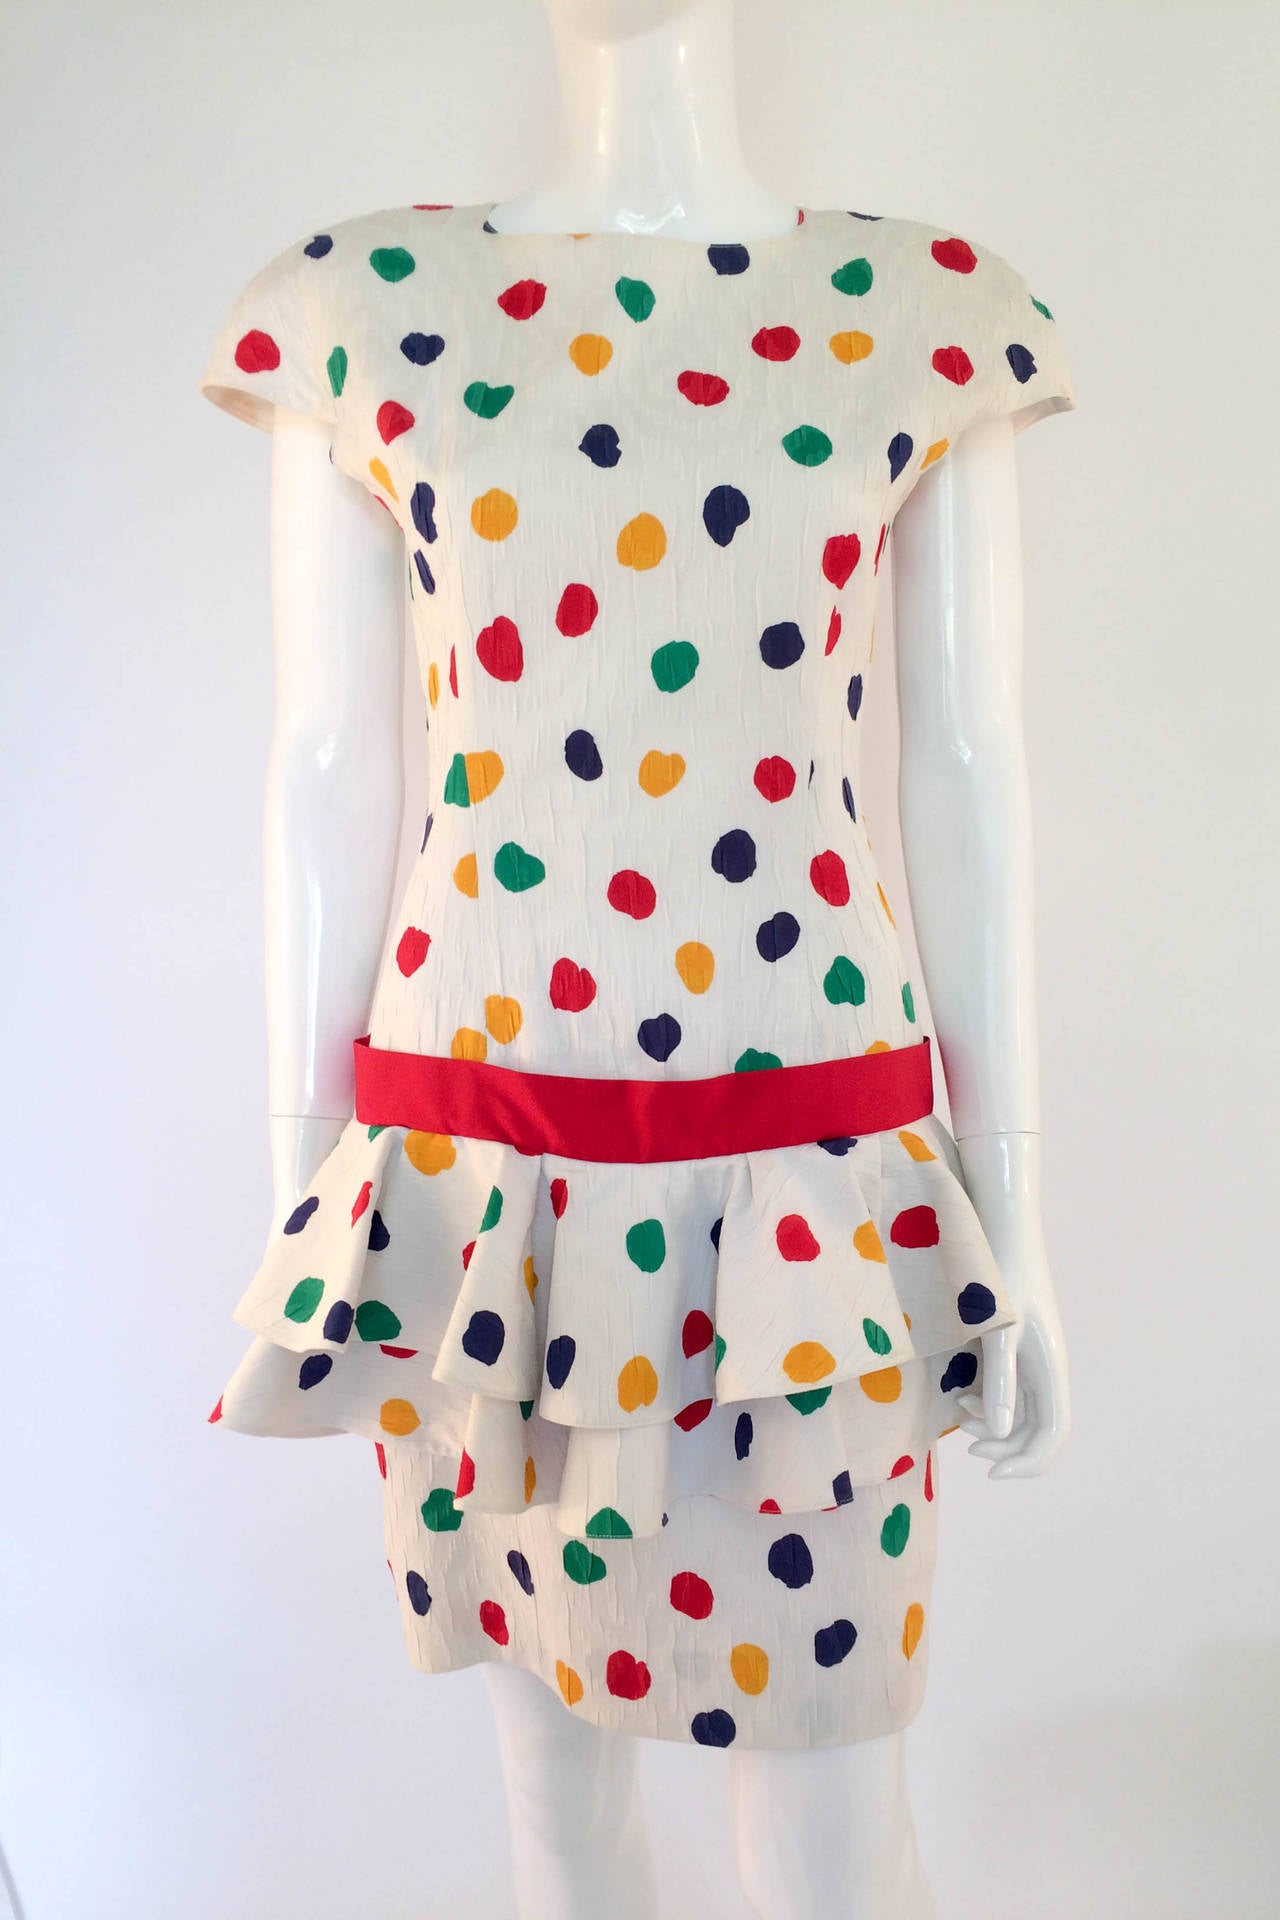 Jazzy rare Guy Laroche cocktail dress. Textured white cotton with red, blue, yellow and green polka dots.  Two tiered layers around the hips, red ribbon belt, triangular cut-out on the back. The sleeves stick out creating a great silhouette. This is